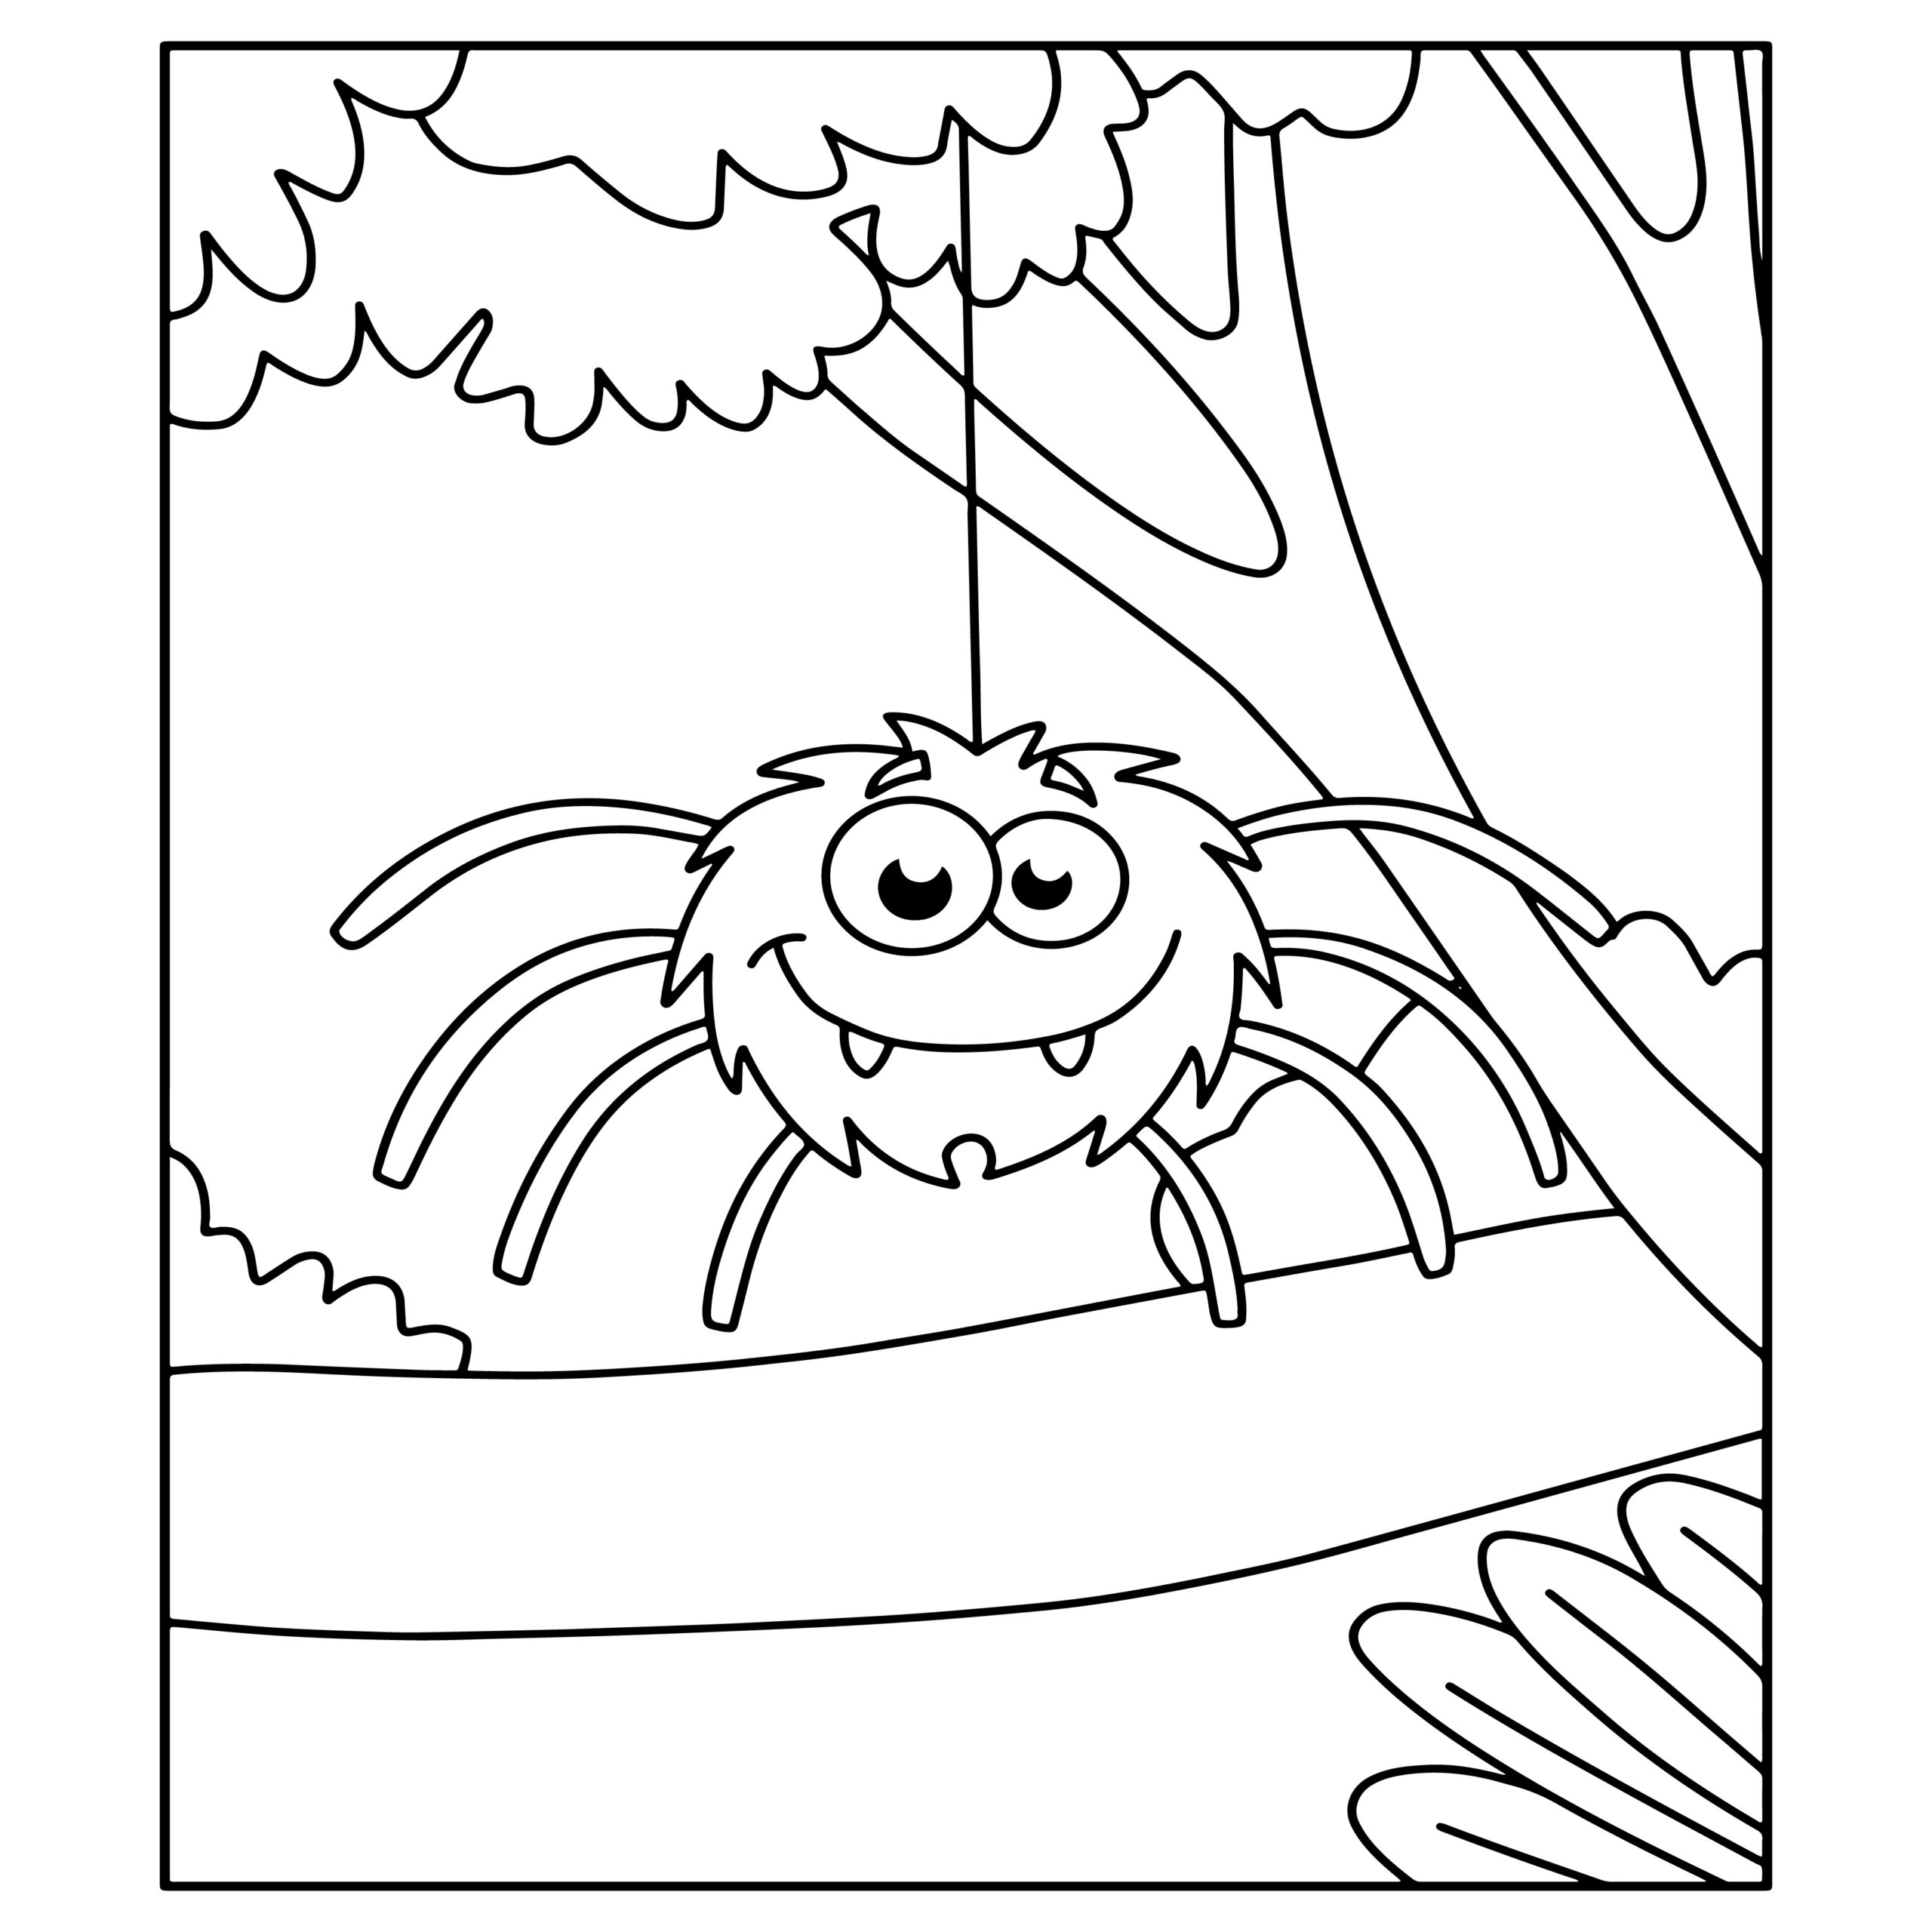 Spider coloring pages for kids spider coloring book made by teachers